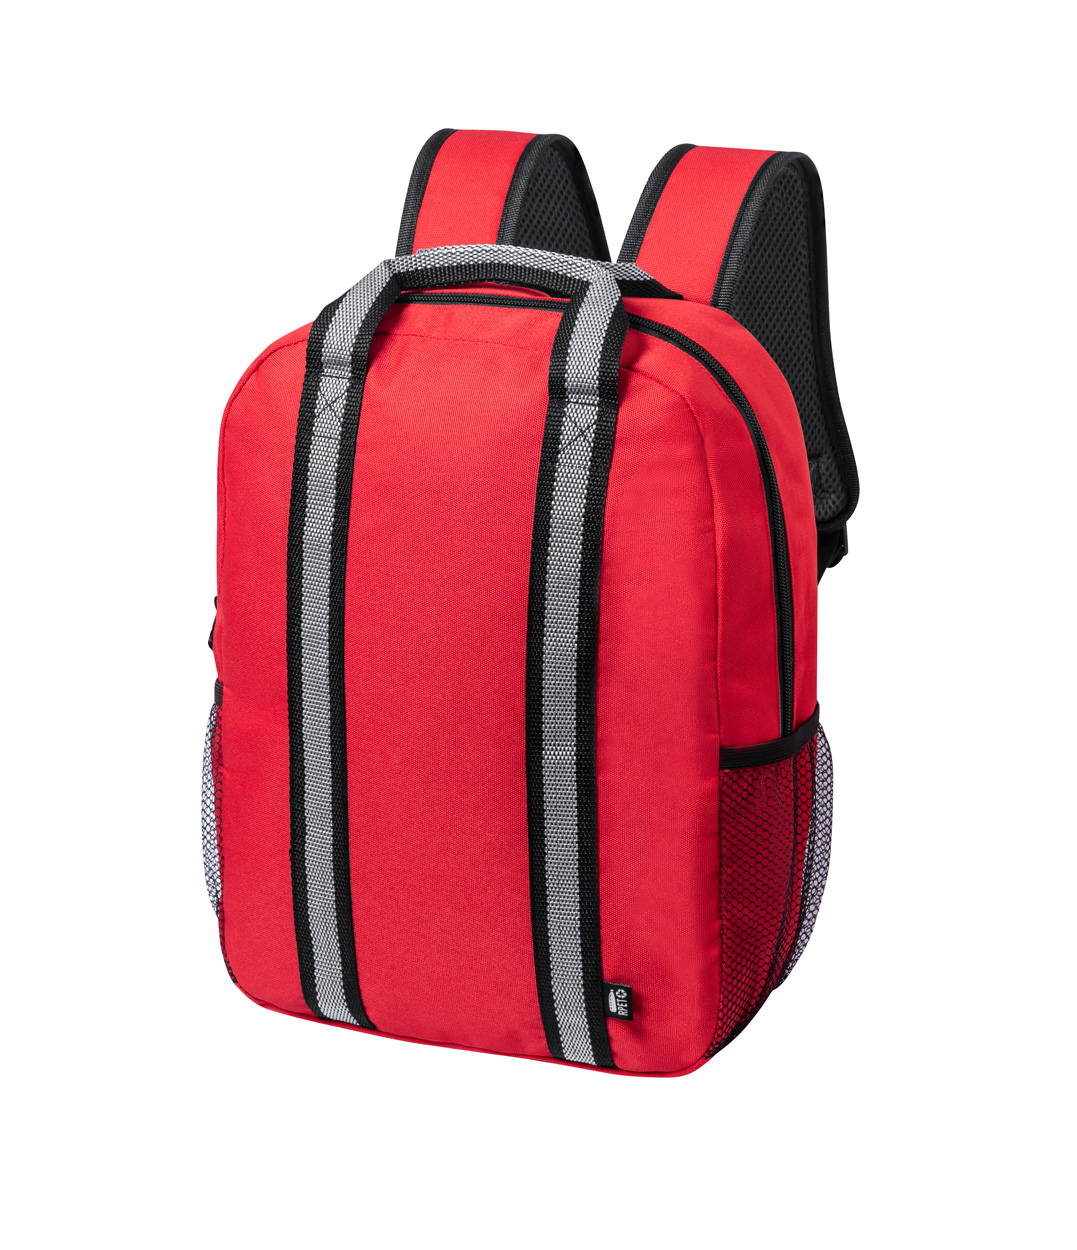 Fabax RPET backpack - red